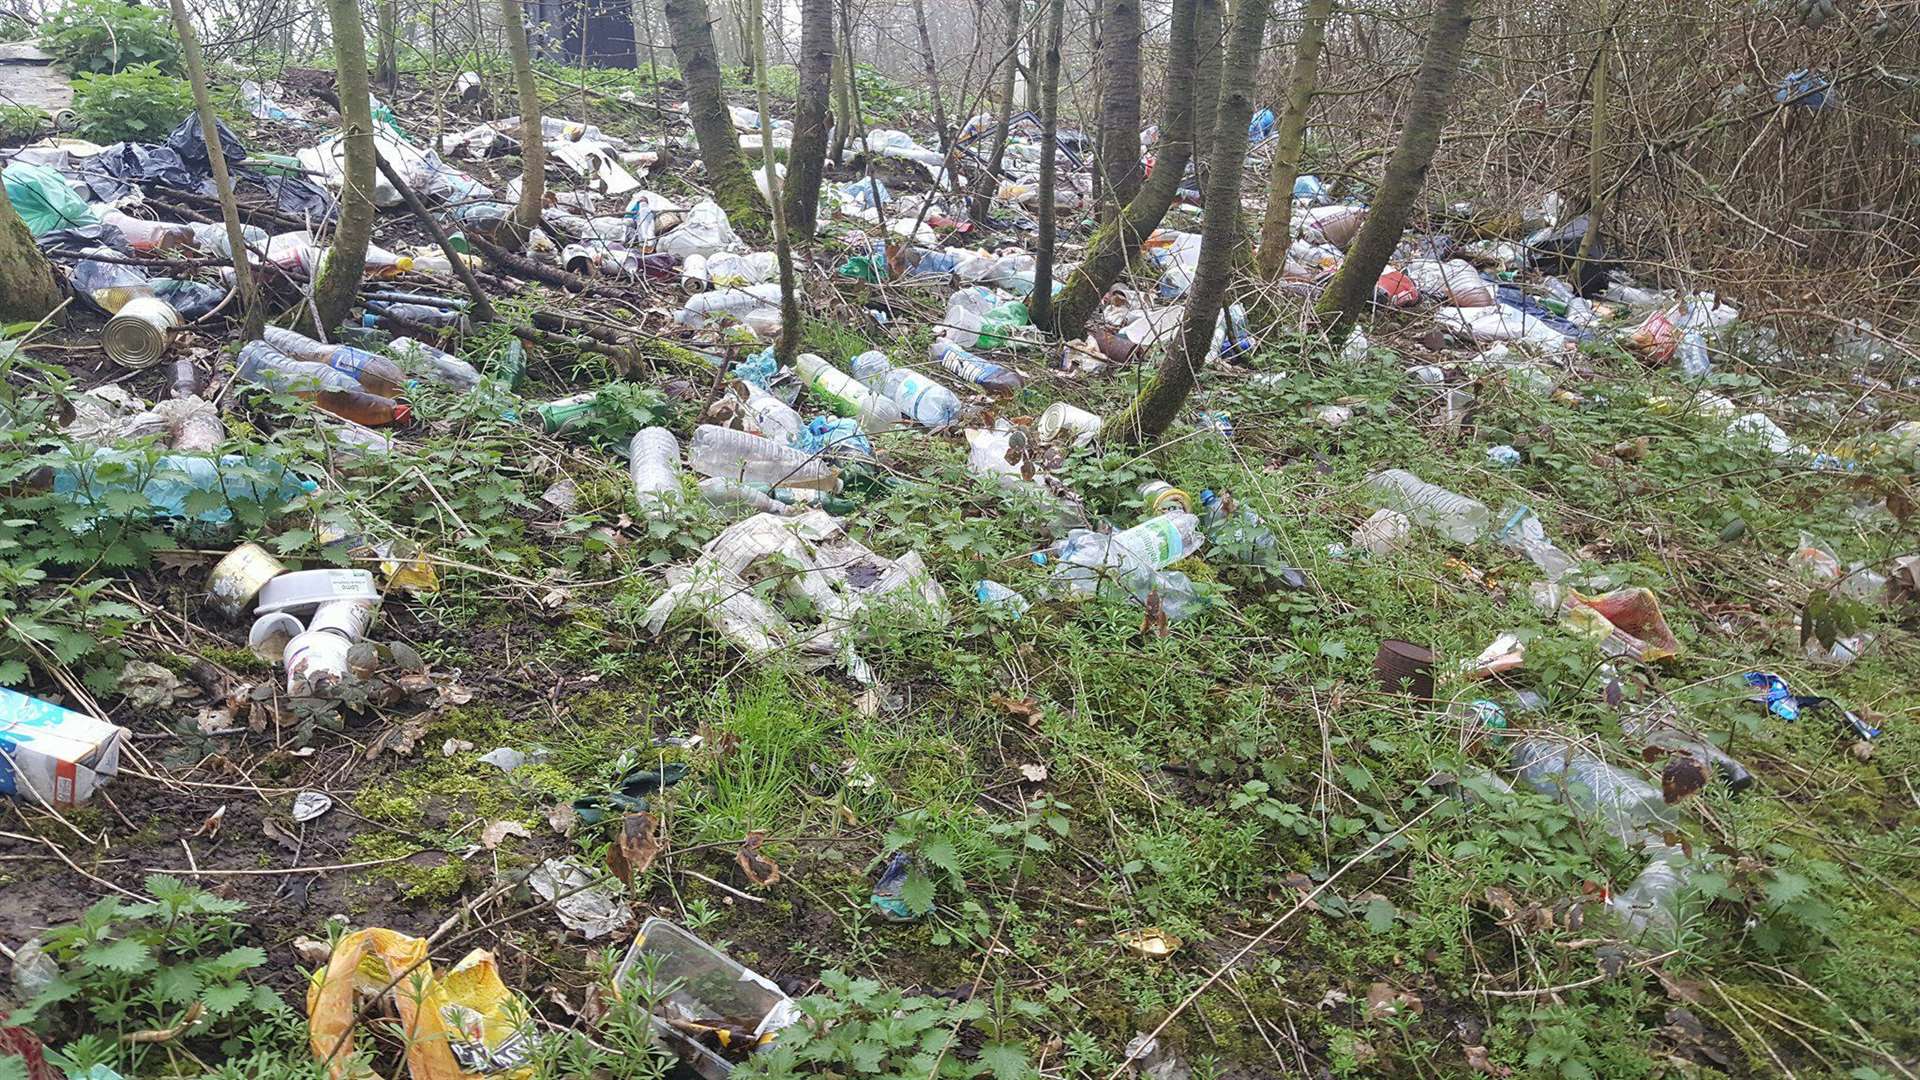 Mounds of rubbish litter the A2's roadside bank